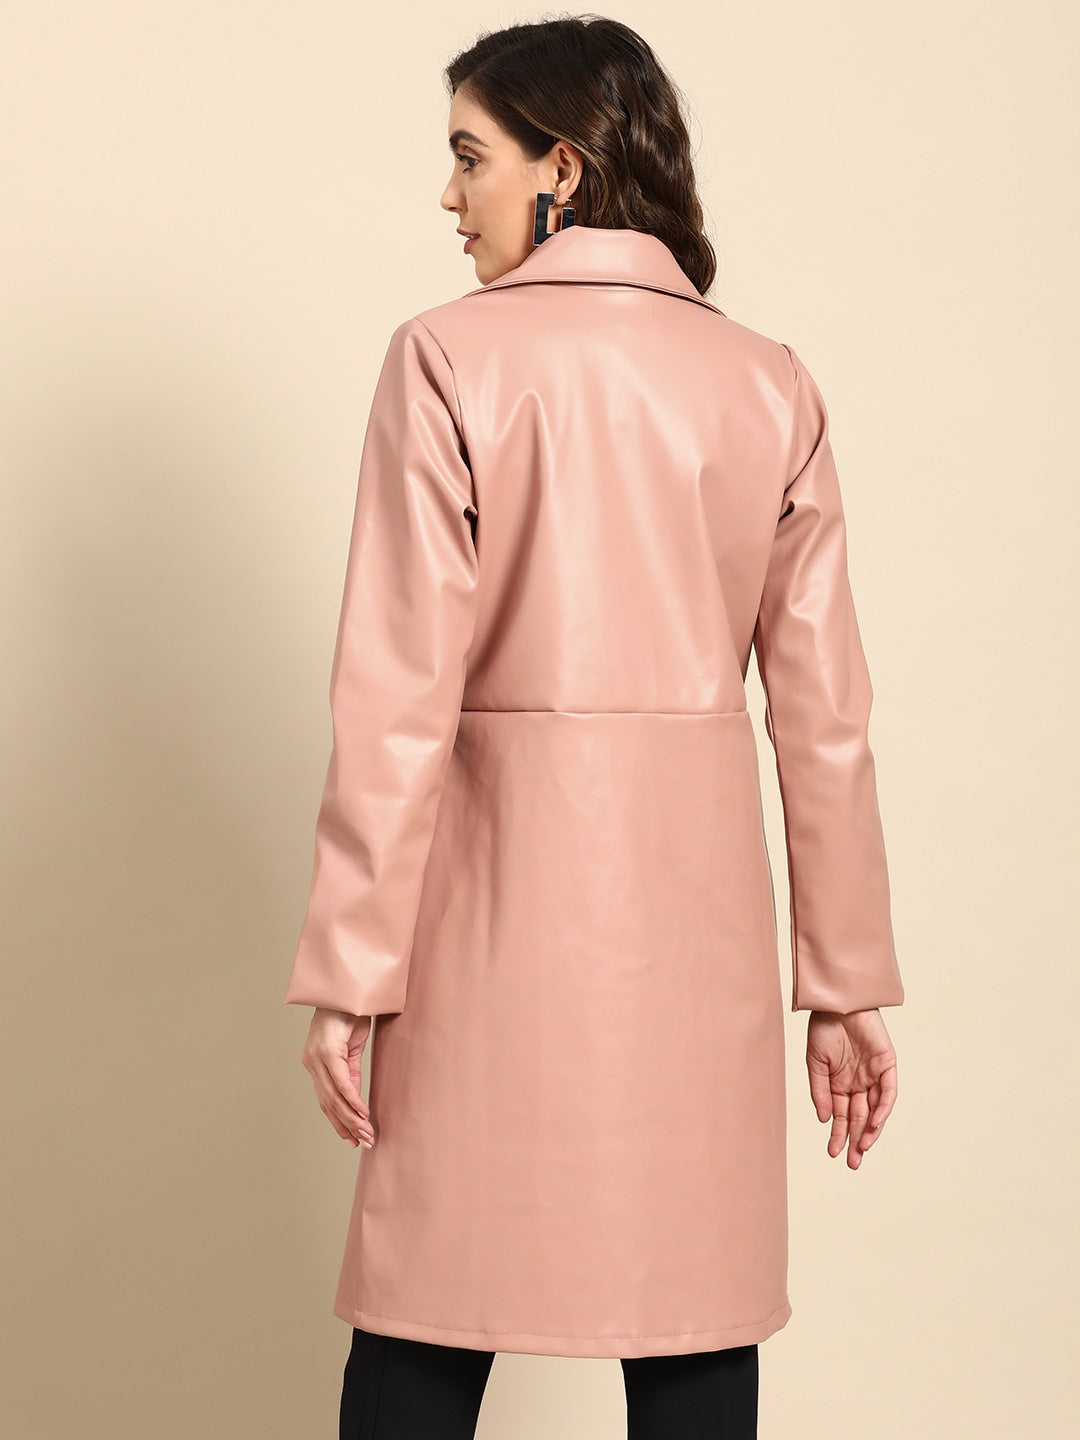 Pink Solid Women Leather Overcoat | QAWACH